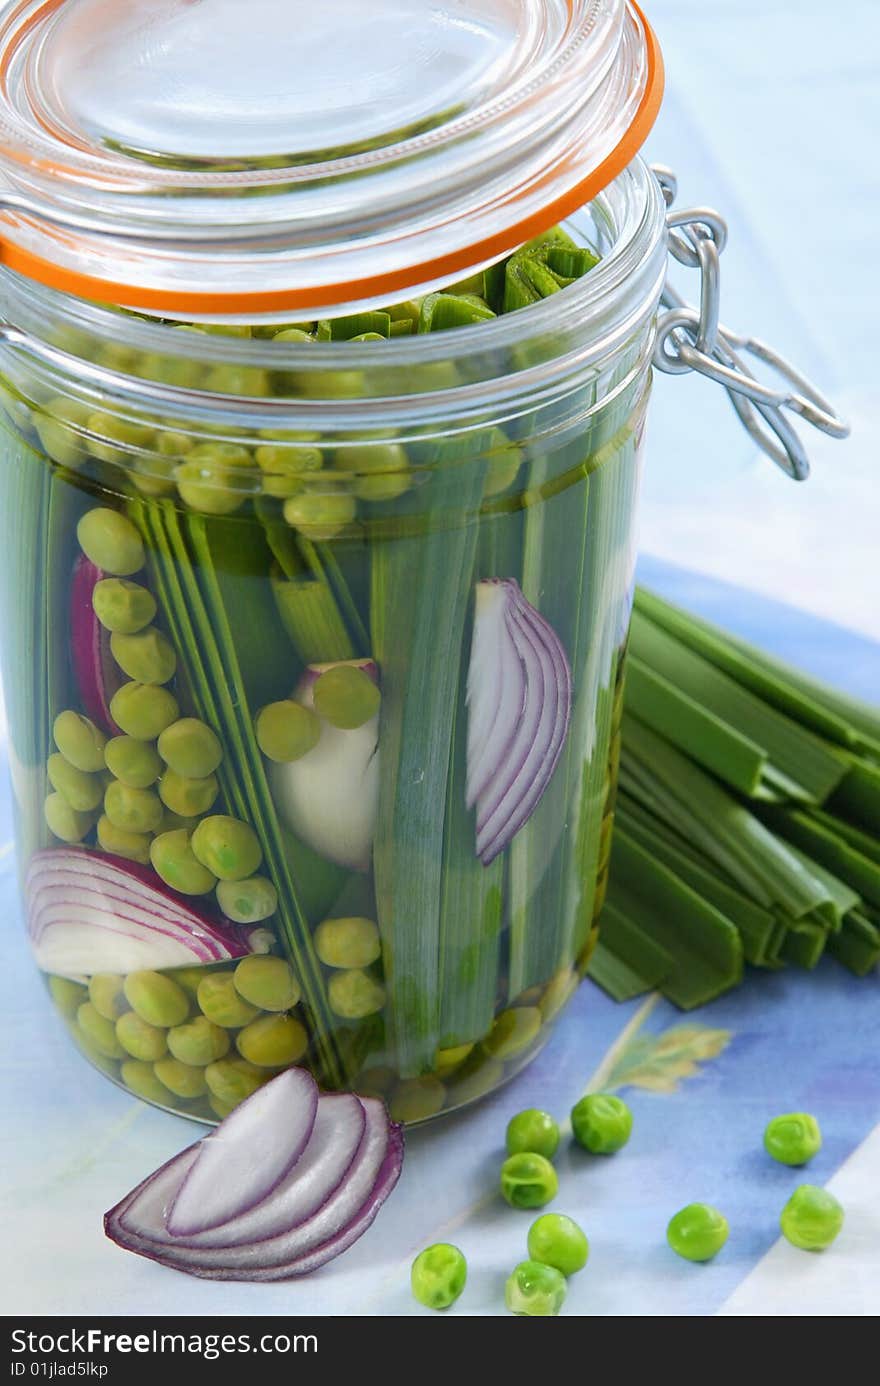 Marinated vegetables in glass jar